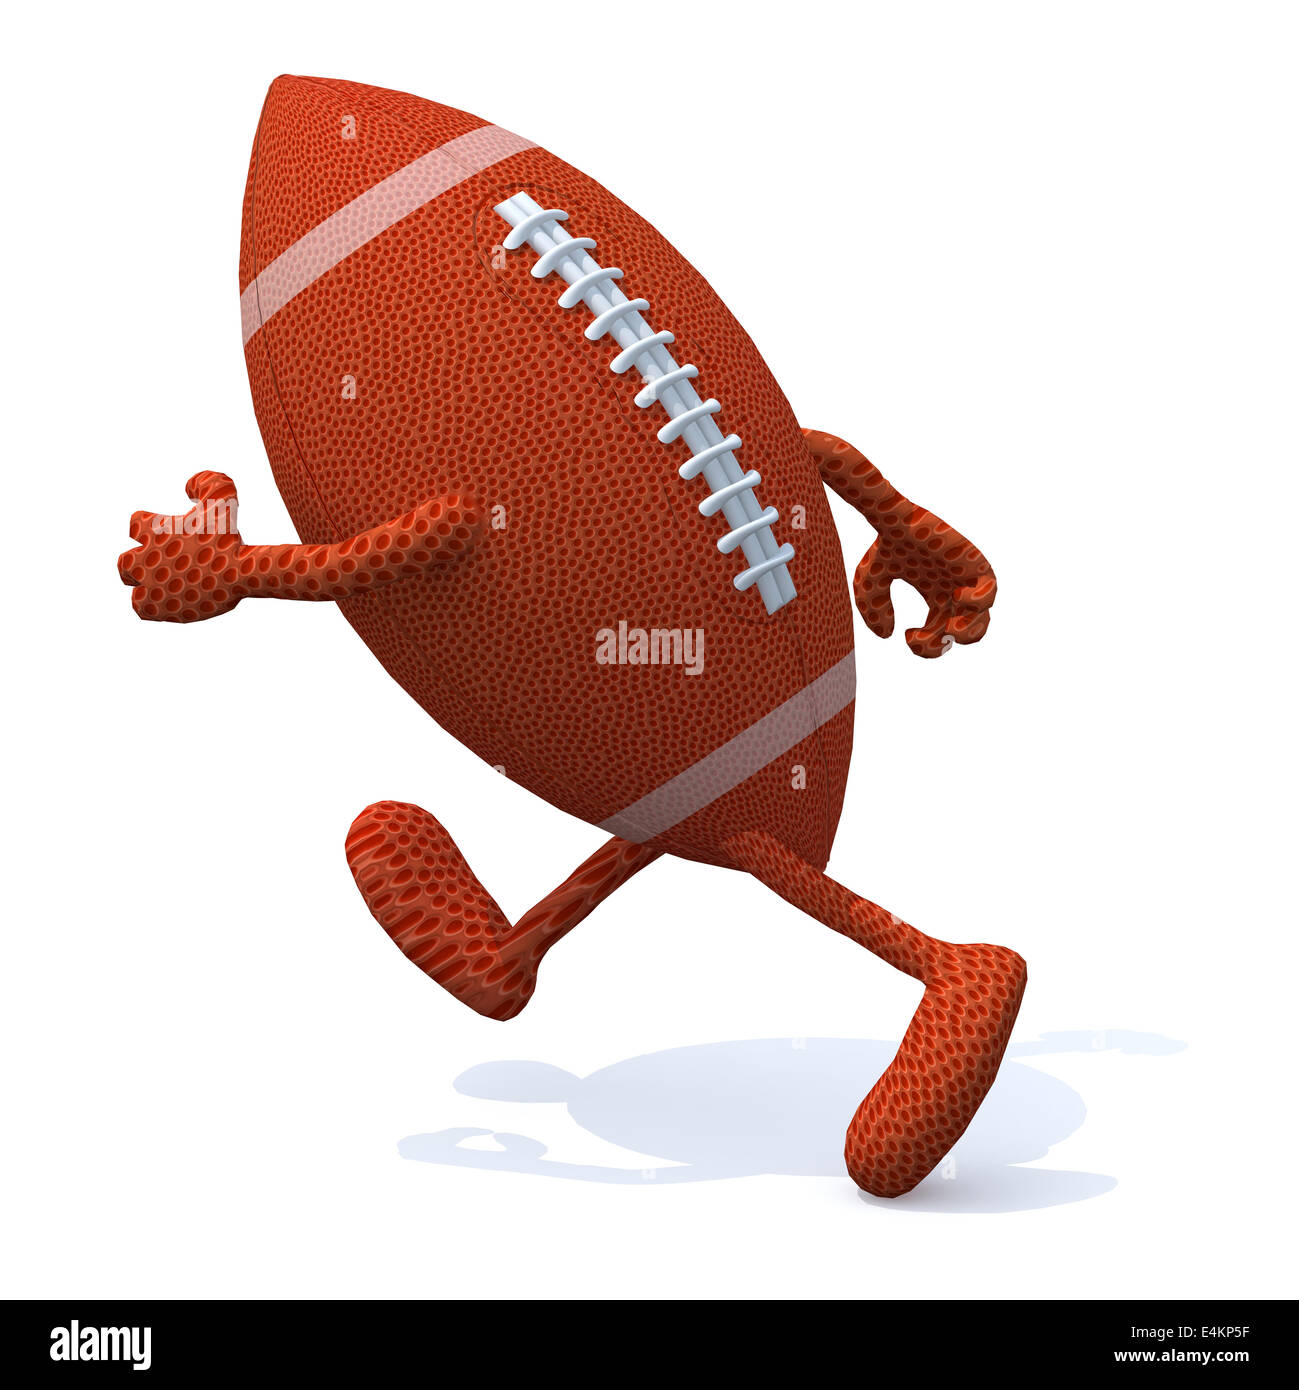 rugby ball with arms and legs running, 3d illustration Stock Photo